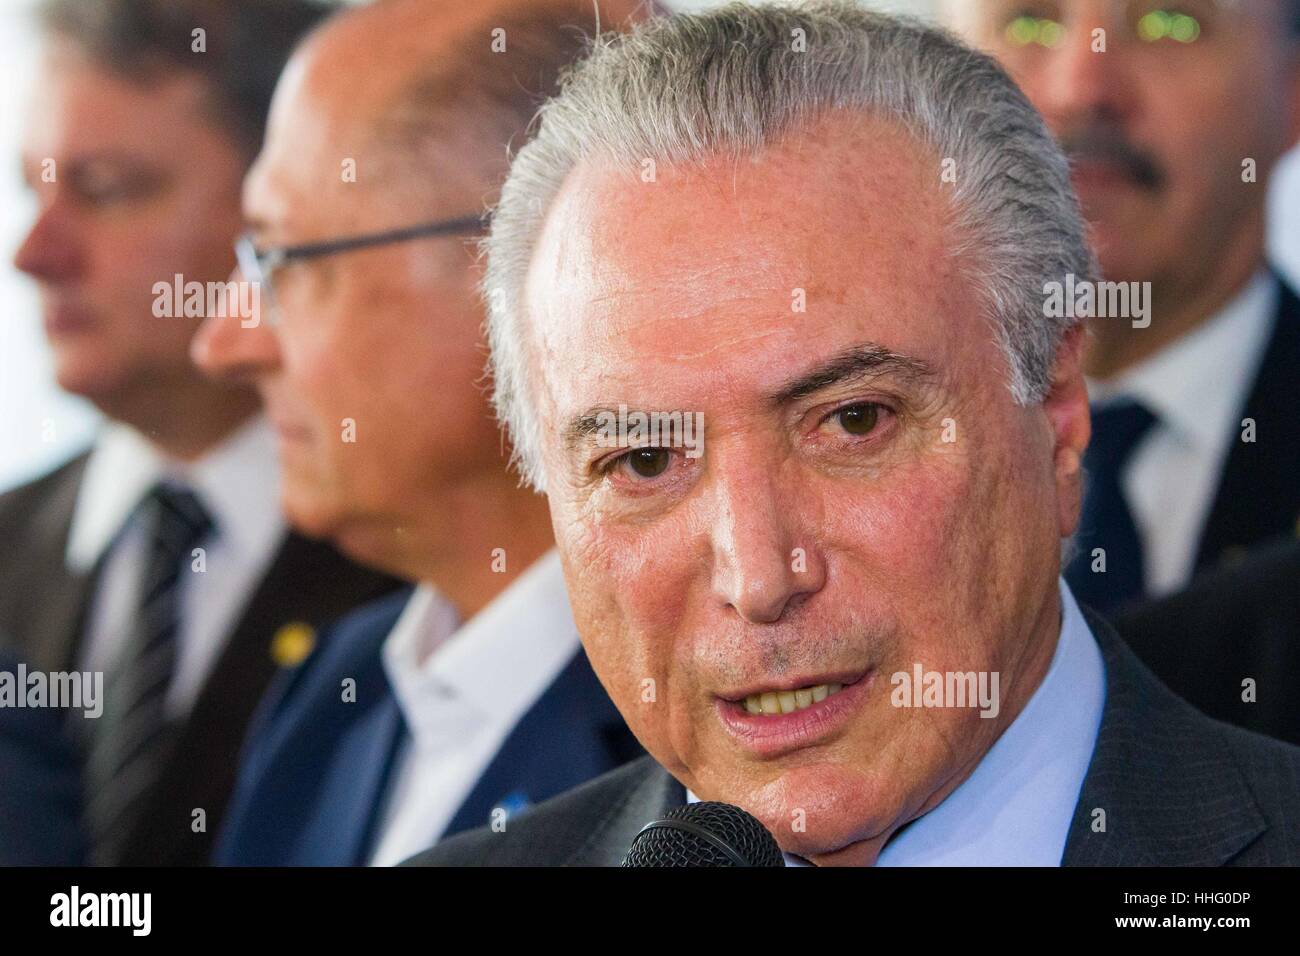 RIBEIRÃO PRETO, SP - 19.01.2017: TEMER E ALCKMIN LANÇAM PLANO SAFRA - President of the Republic, Michel Temer, gives an interview during the launching ceremony of the &quot-Fundingding for the 2017/18 Harvest Plan&quot;  at tht the IAC (Agronomic Institute of Camp) - Cana Cen Center in the city of Ribeirão Preto / SP (Photo: João Moura/Fotoarena) Stock Photo